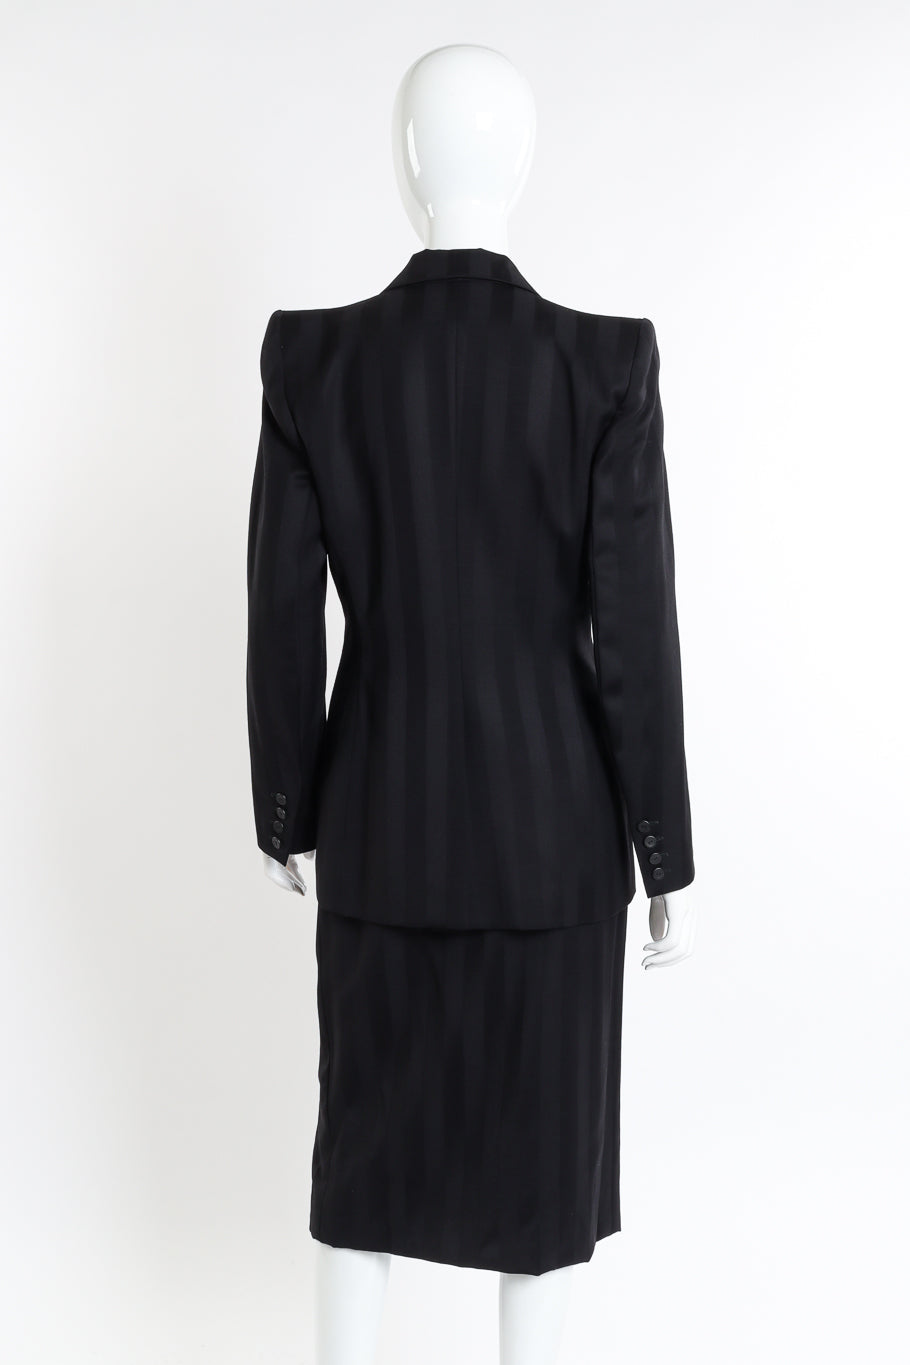 Vented Wool Stripe Blazer & Skirt Suit by Givenchy on mannequin back @recessla